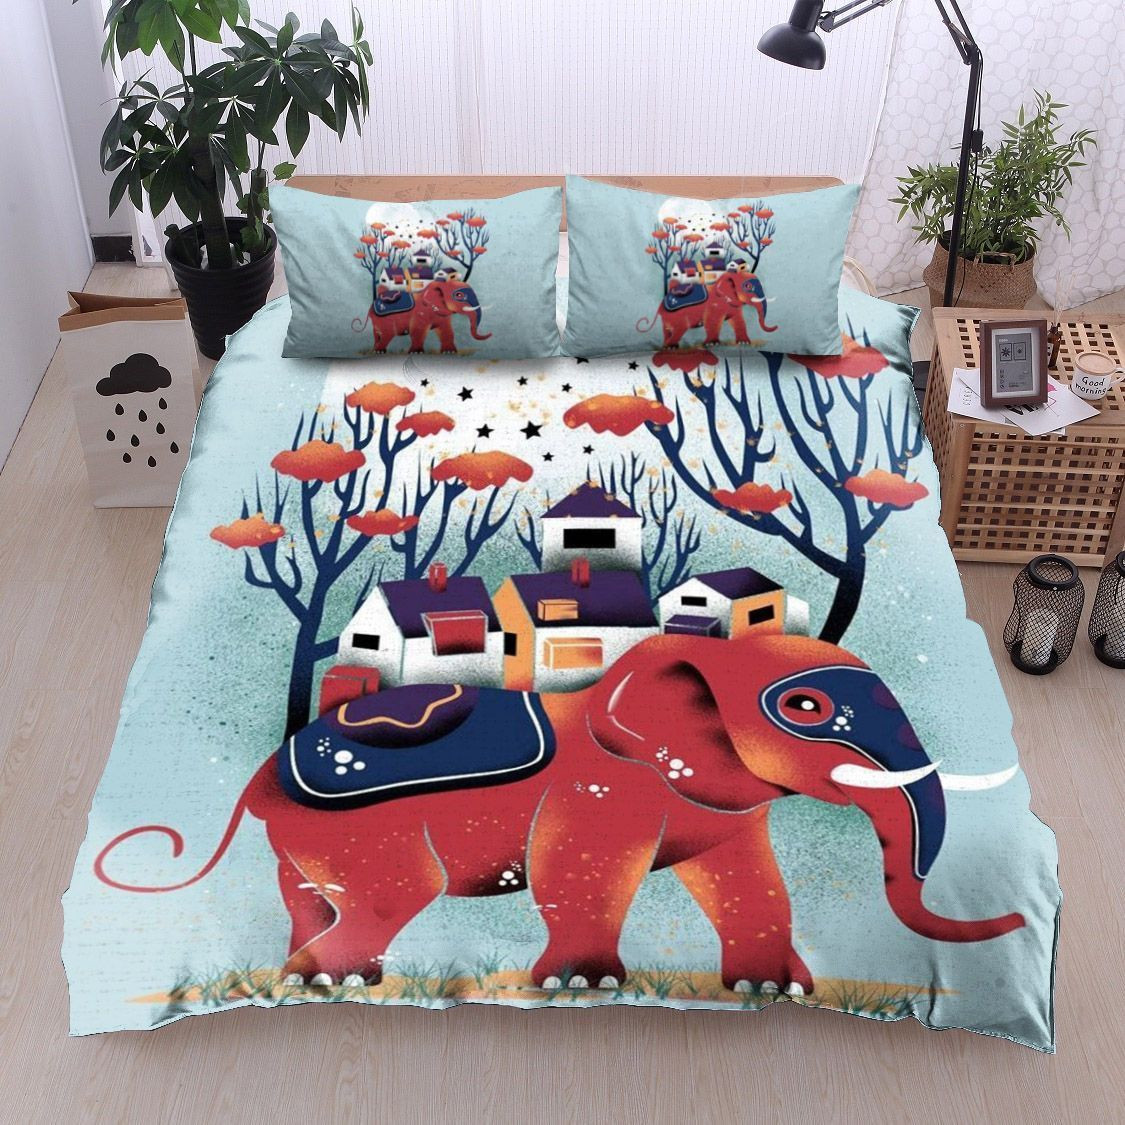 elephant habitat bed linens quilt cover bedding collections hlcrm